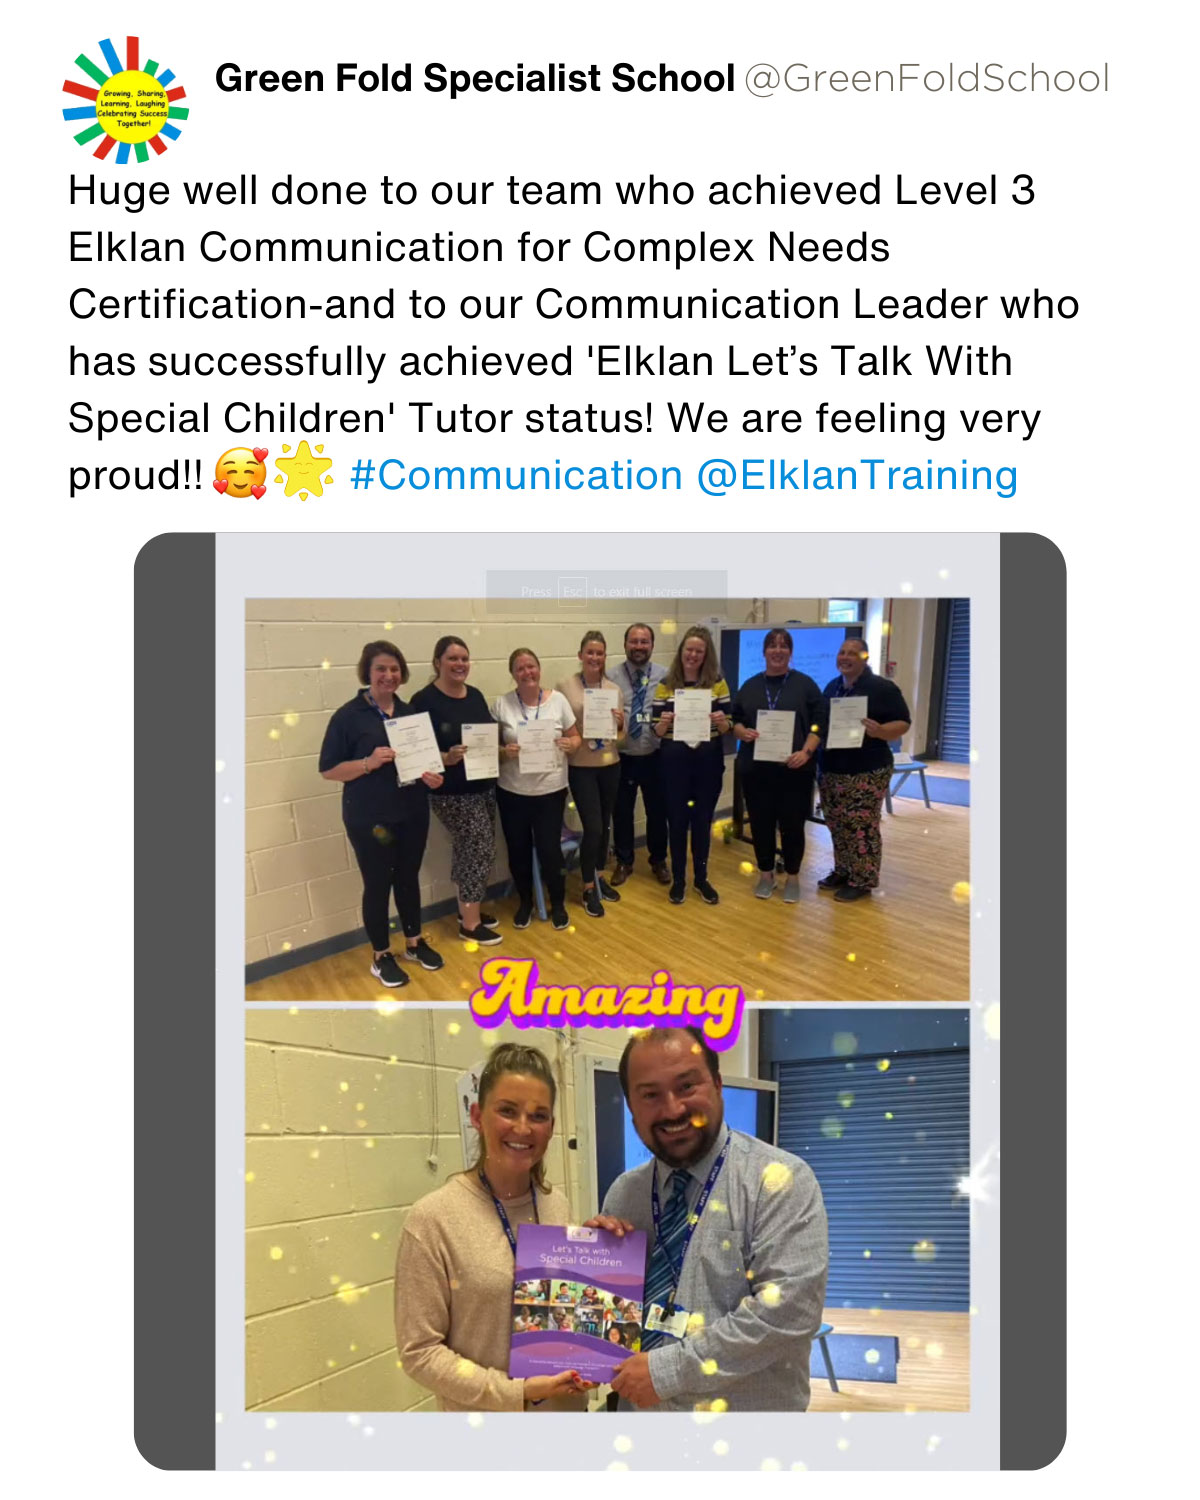 Huge well done to our team who achieved Level 3 Elklan Communication for Complex Needs Certification - and to our Communication Leader who has successfully achieved 'Elklan Let's Talk With Special Children' Tutor status! We are very proud!!